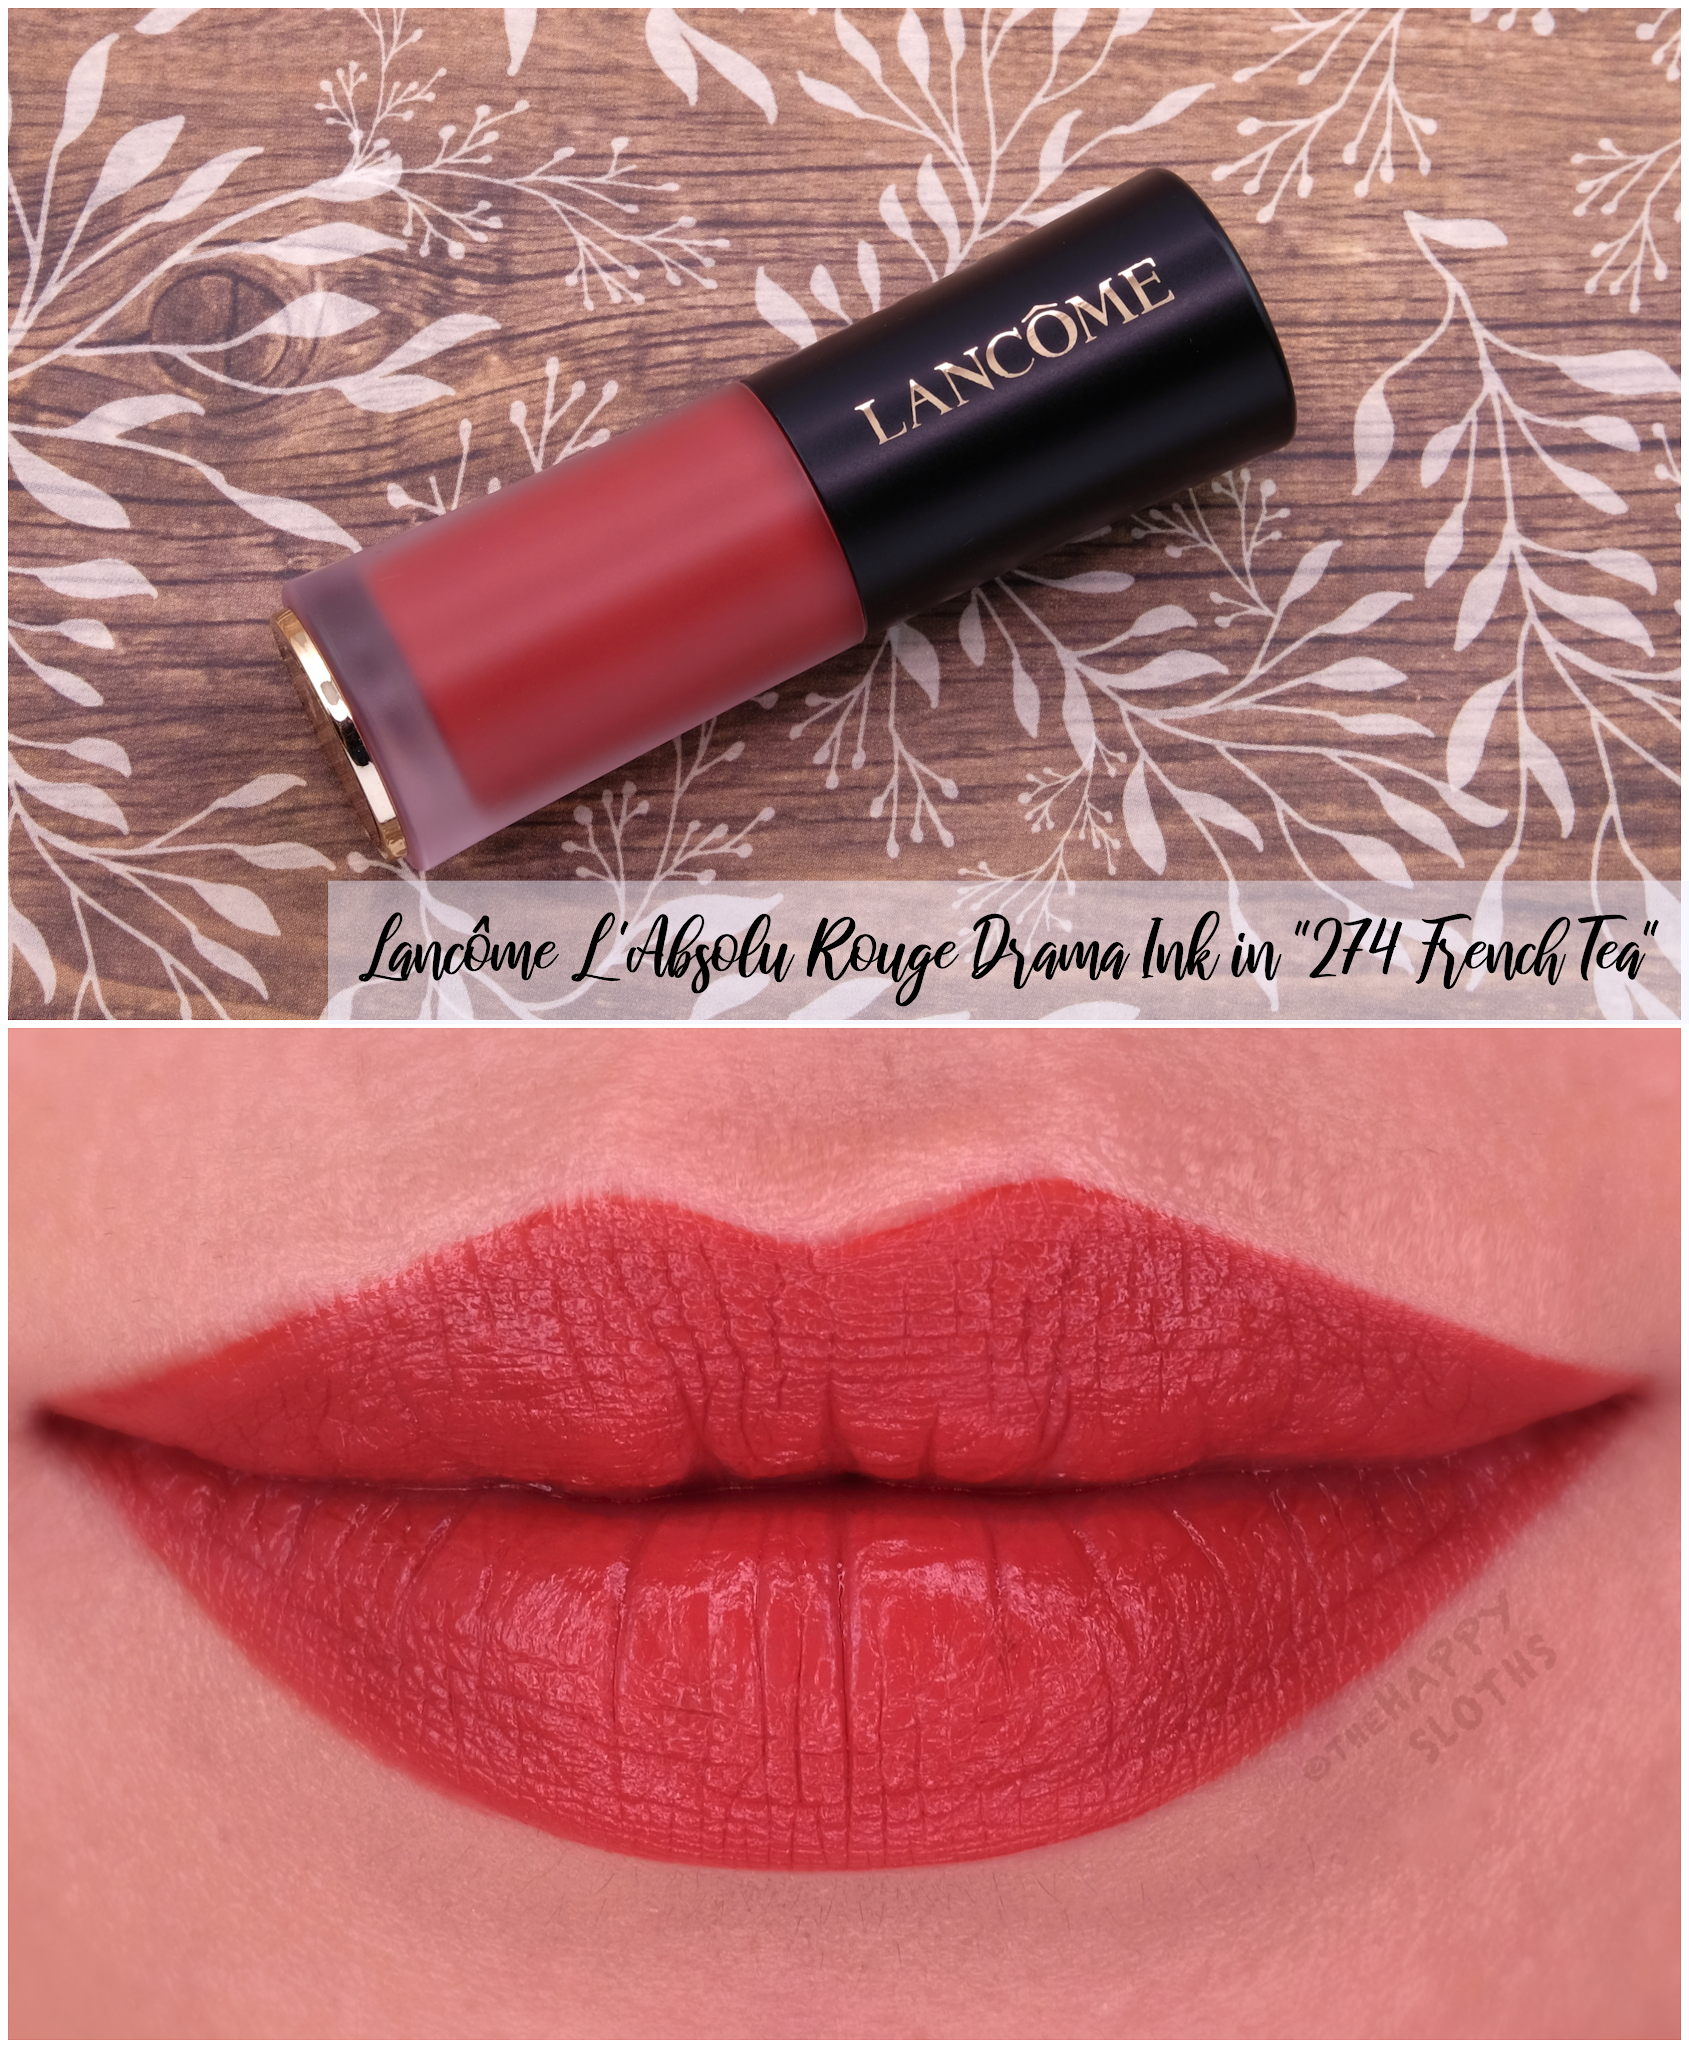 Lancôme | L'Absolu Rouge Drama Ink: and Swatches | The Happy Sloths: Beauty, Makeup, and Skincare Reviews and Swatches